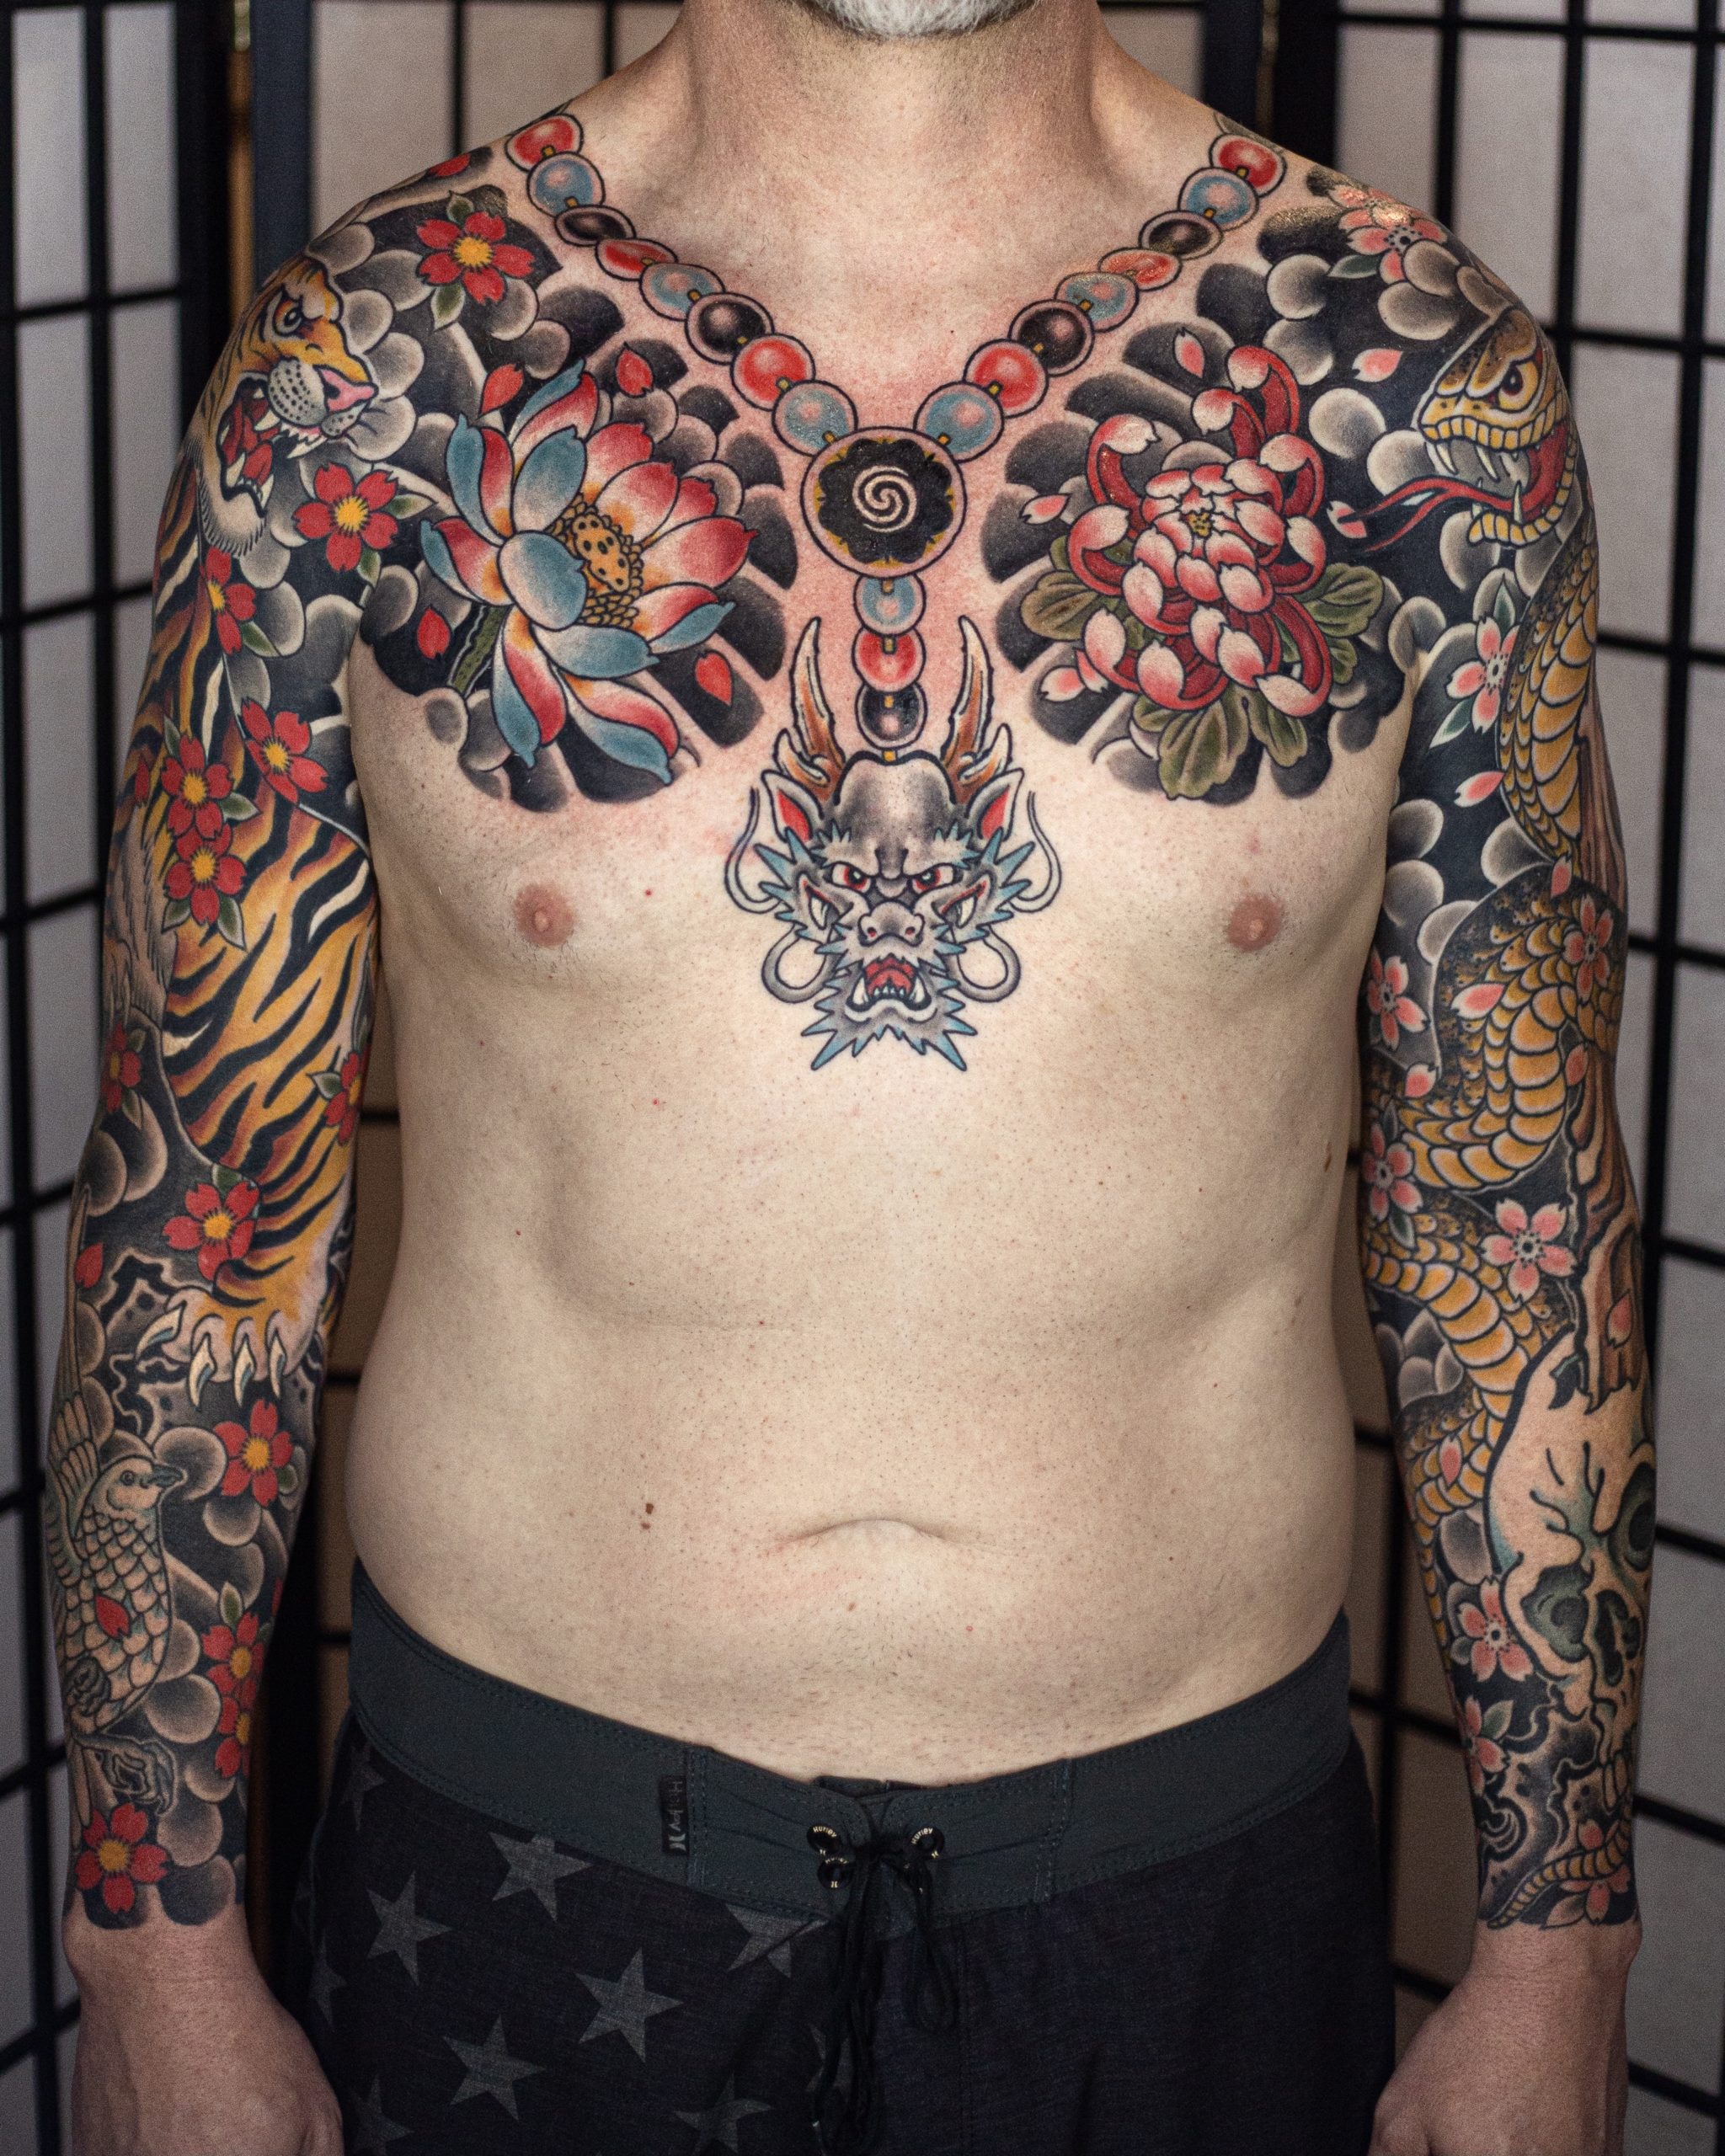 https://chapteronetattoo.com/wp-content/uploads/2022/03/traditional-japanese-sleeves-and-chest-tattoo.jpg